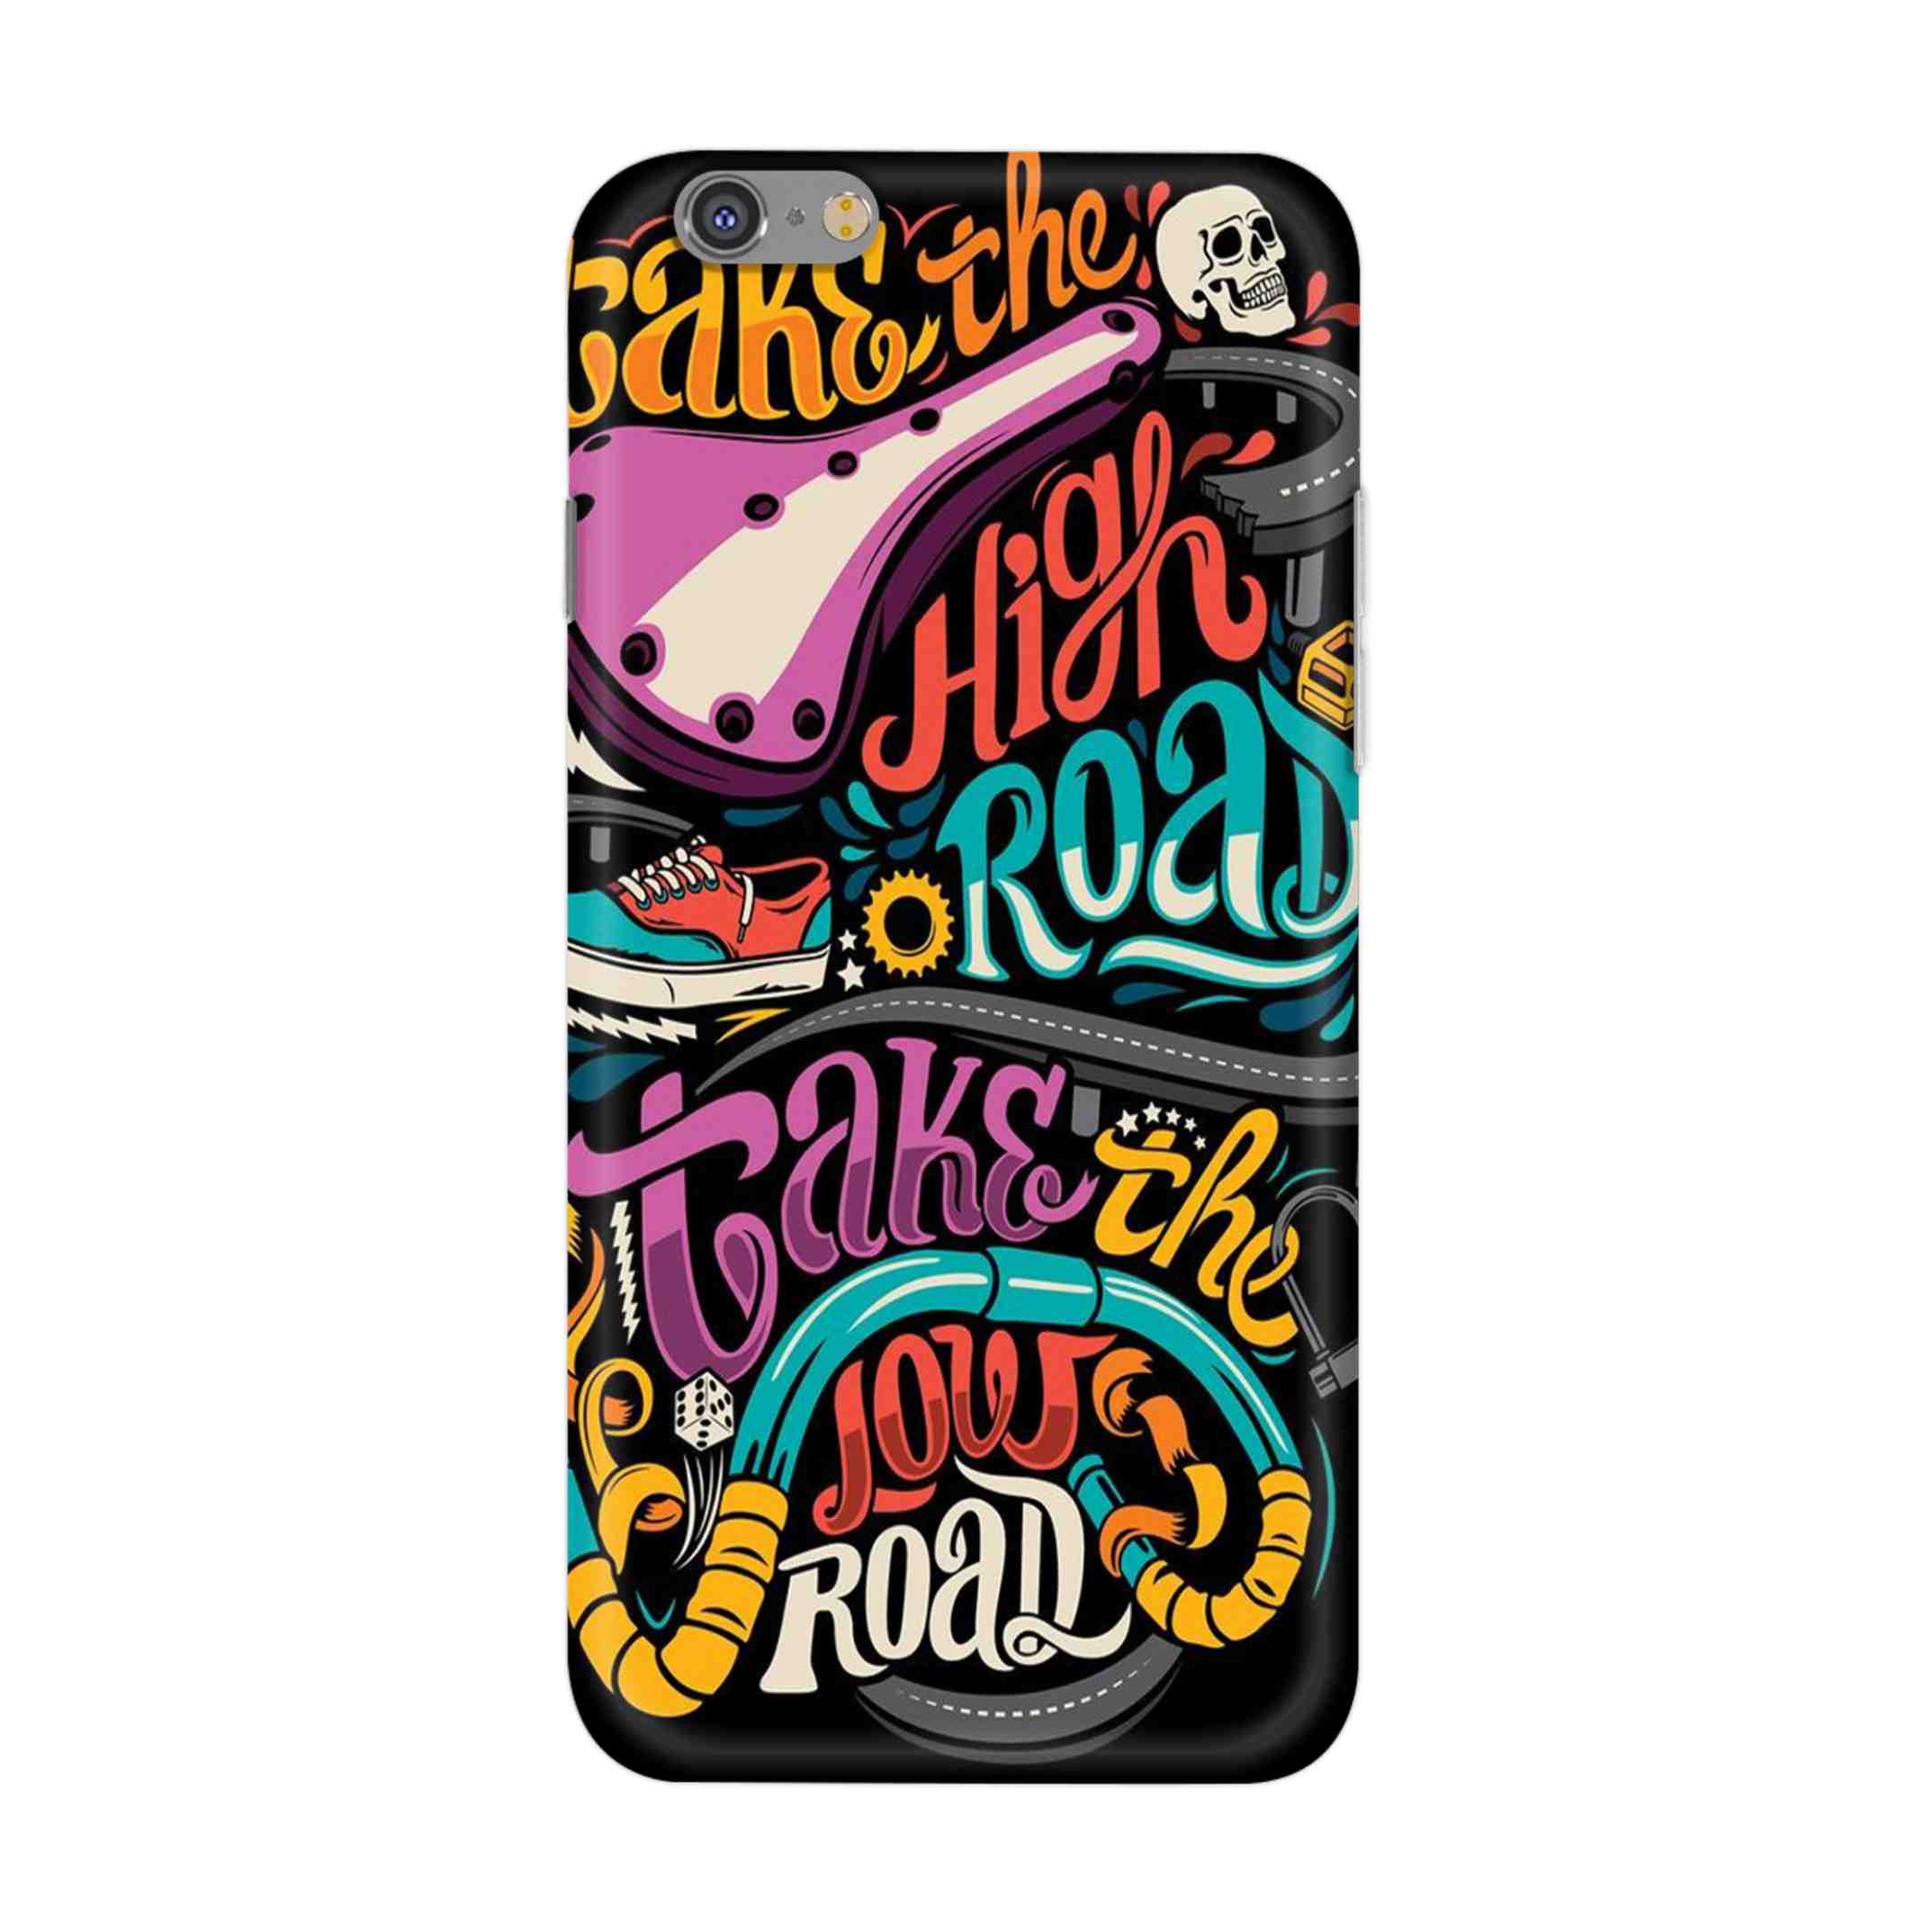 Buy Take The High Road Hard Back Mobile Phone Case/Cover For iPhone 6 Plus / 6s Plus Online